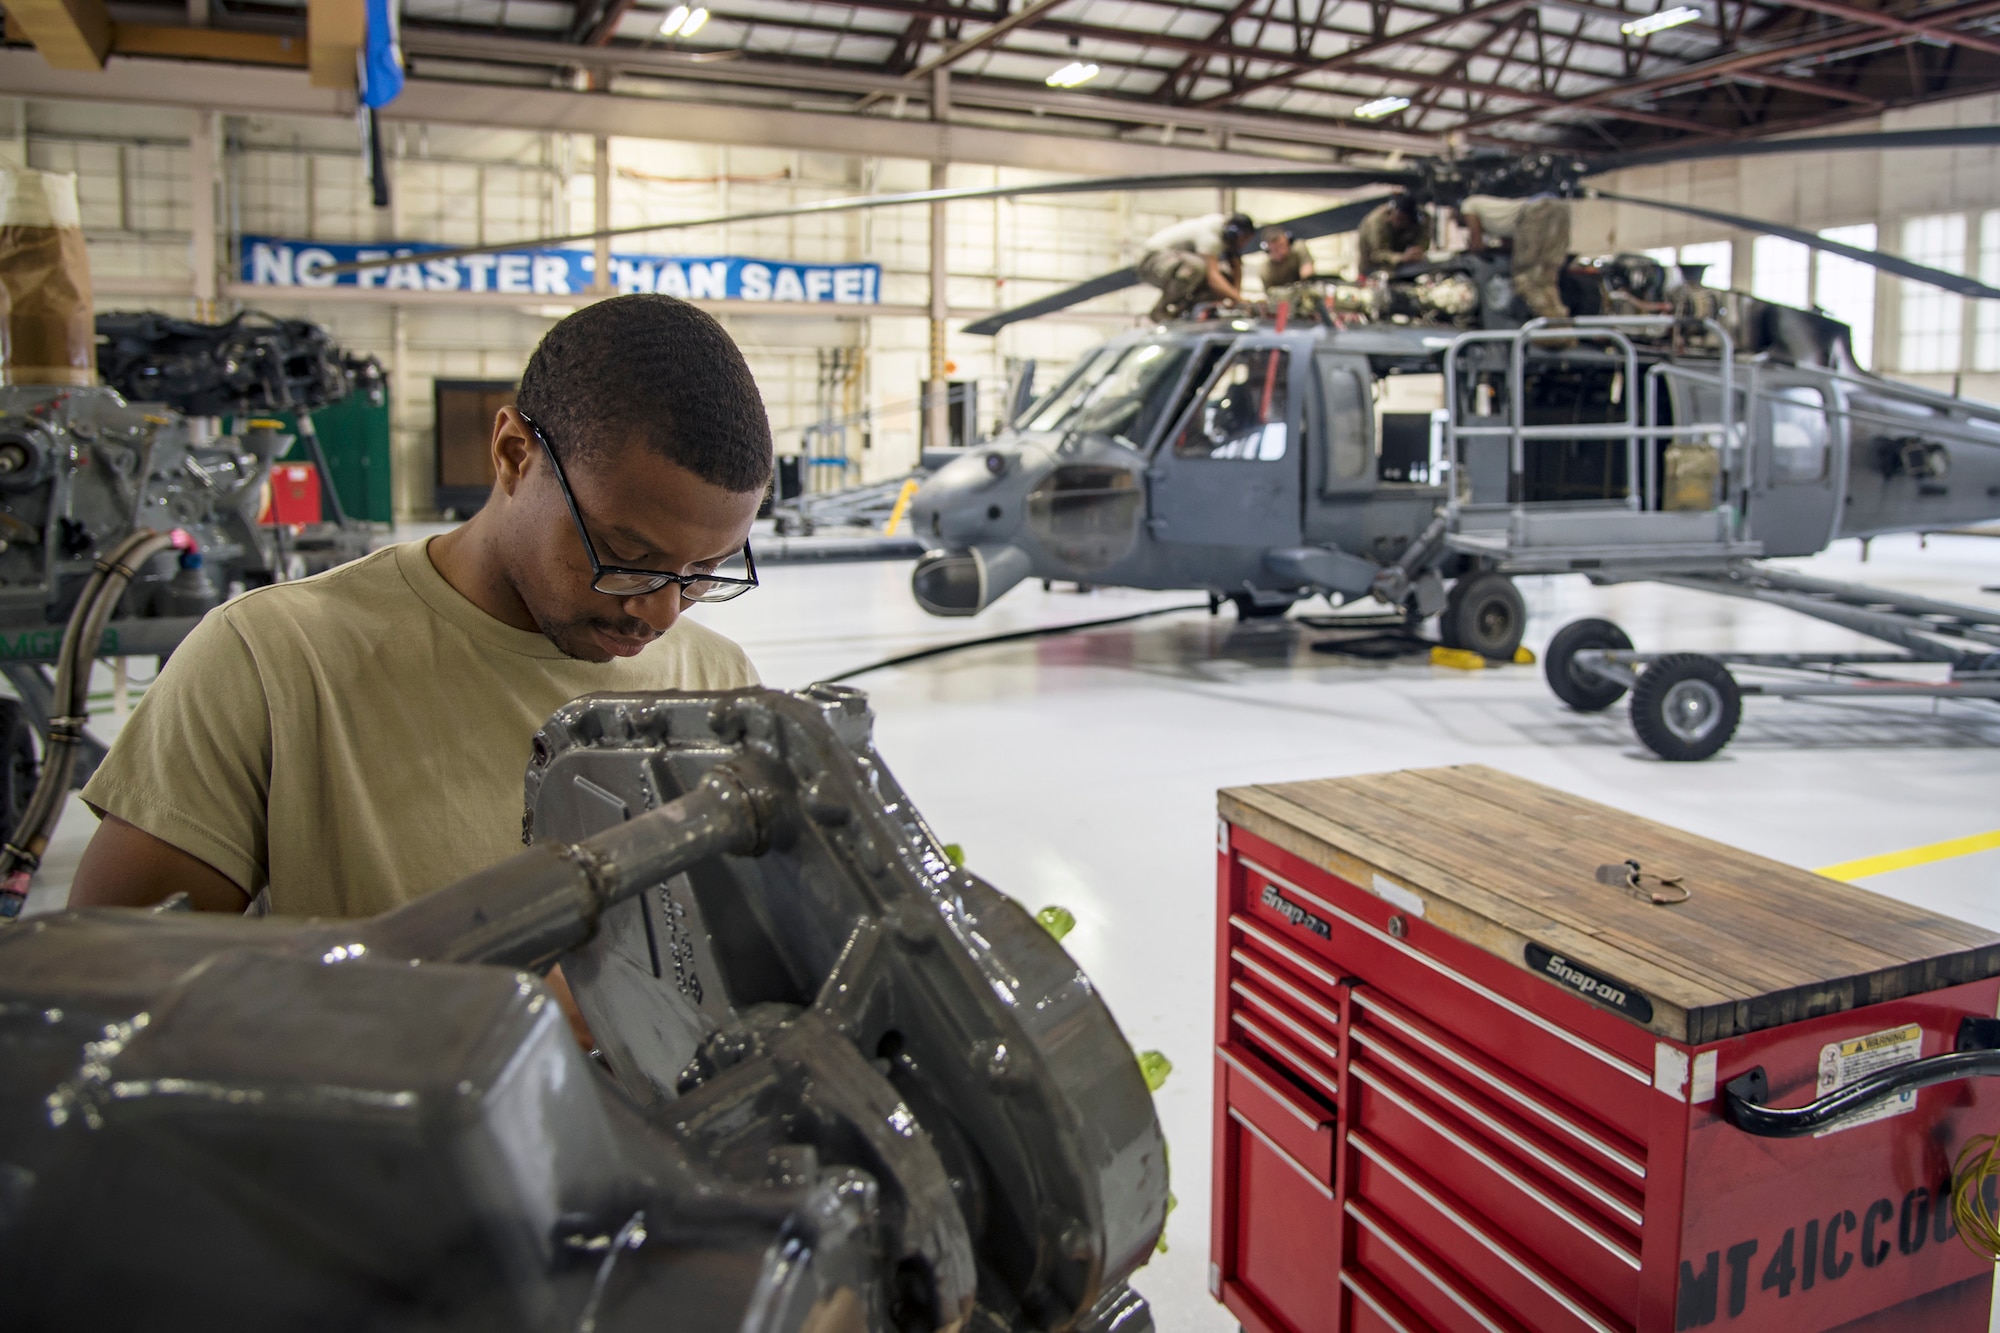 An Airman from the 723d Aircraft Maintenance Squadron (AMXS), inspects an accessory module, May 15, 2018, at Moody Air Force Base, Ga. Airmen from the 723d AMXS along with machinists from the Corpus Christi Army Depot conducted a full-structural tear down and restoration on an HH-60G Pave Hawk. Once the aircraft was torn down, Airmen and the machinists performed repairs on all of its components prior to resembling it. (U.S. Air Force photo by Airman 1st Class Eugene Oliver)